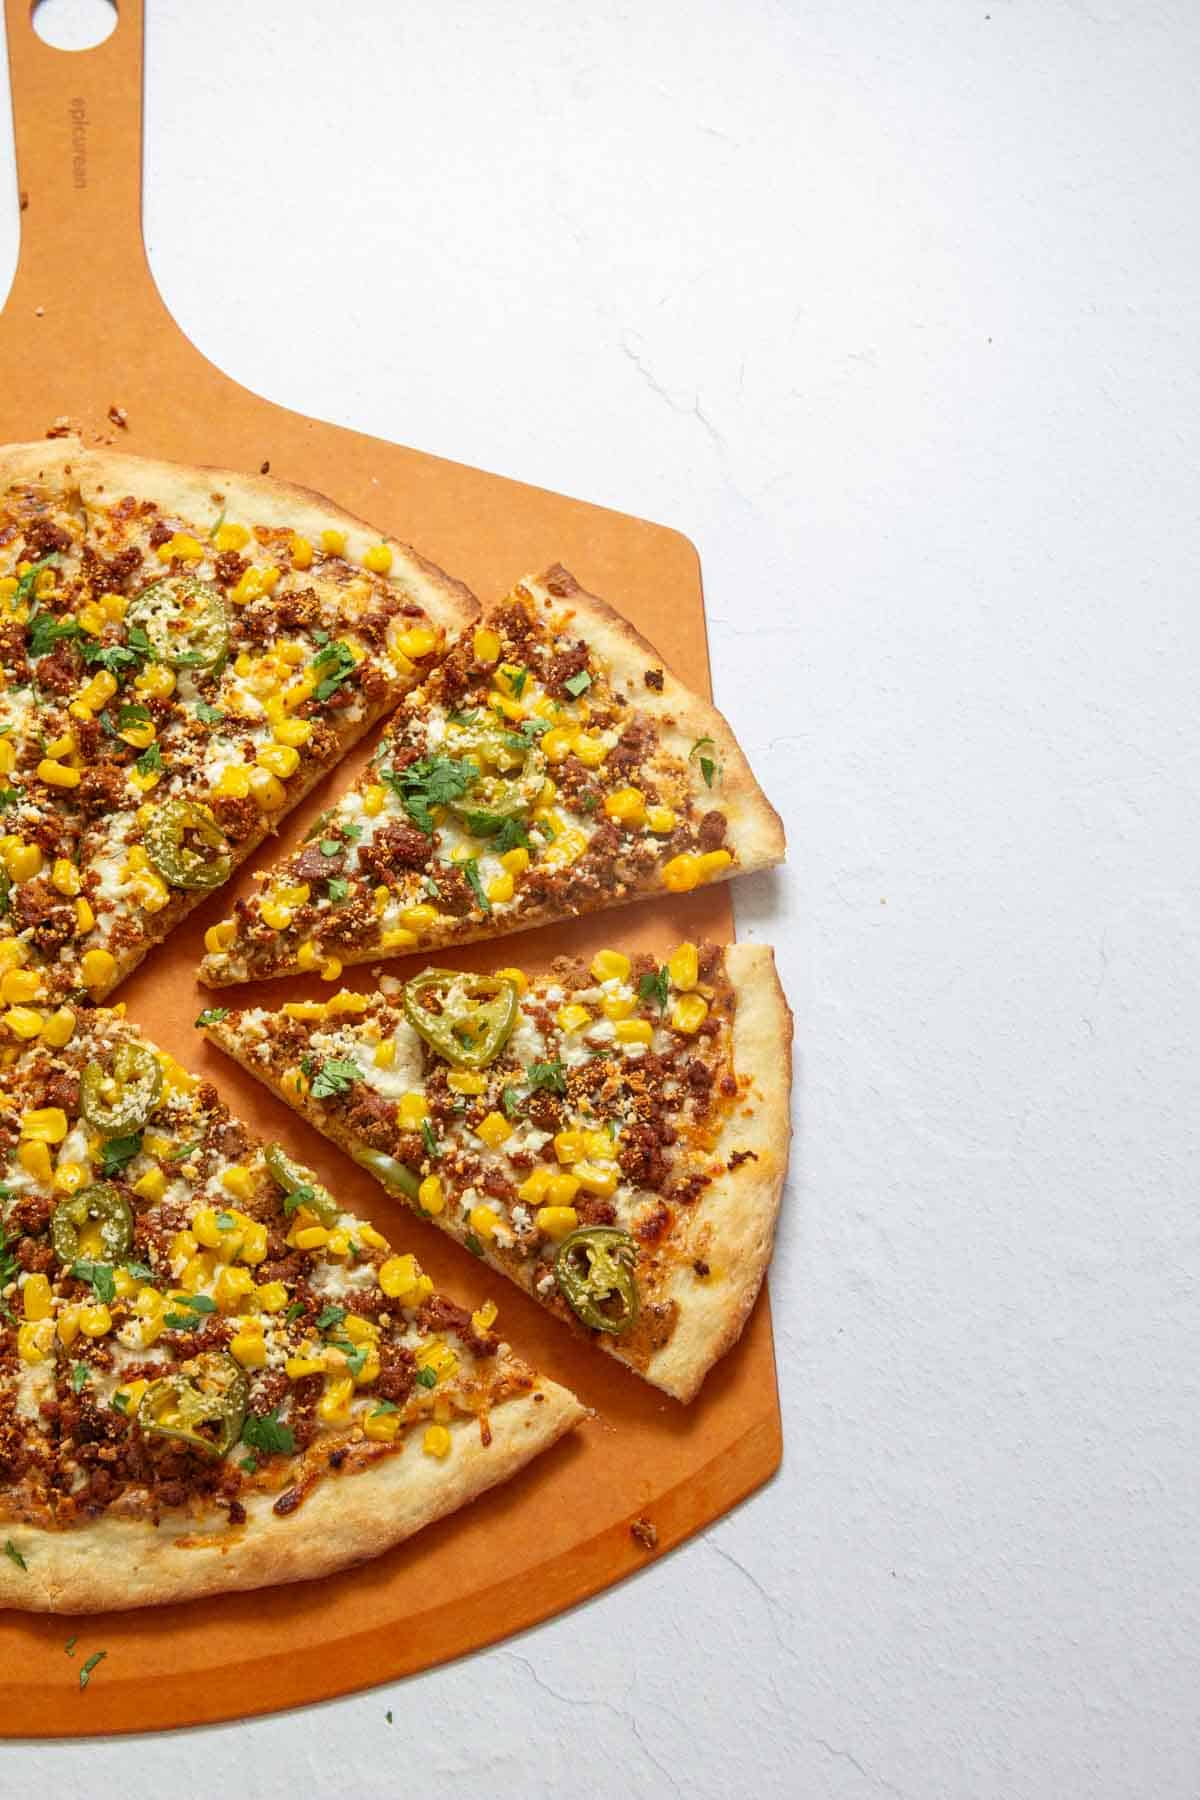 A pizza with sliced jalapeños, corn, green peppers, and ground meat on a wooden board. One piece has been partially removed.